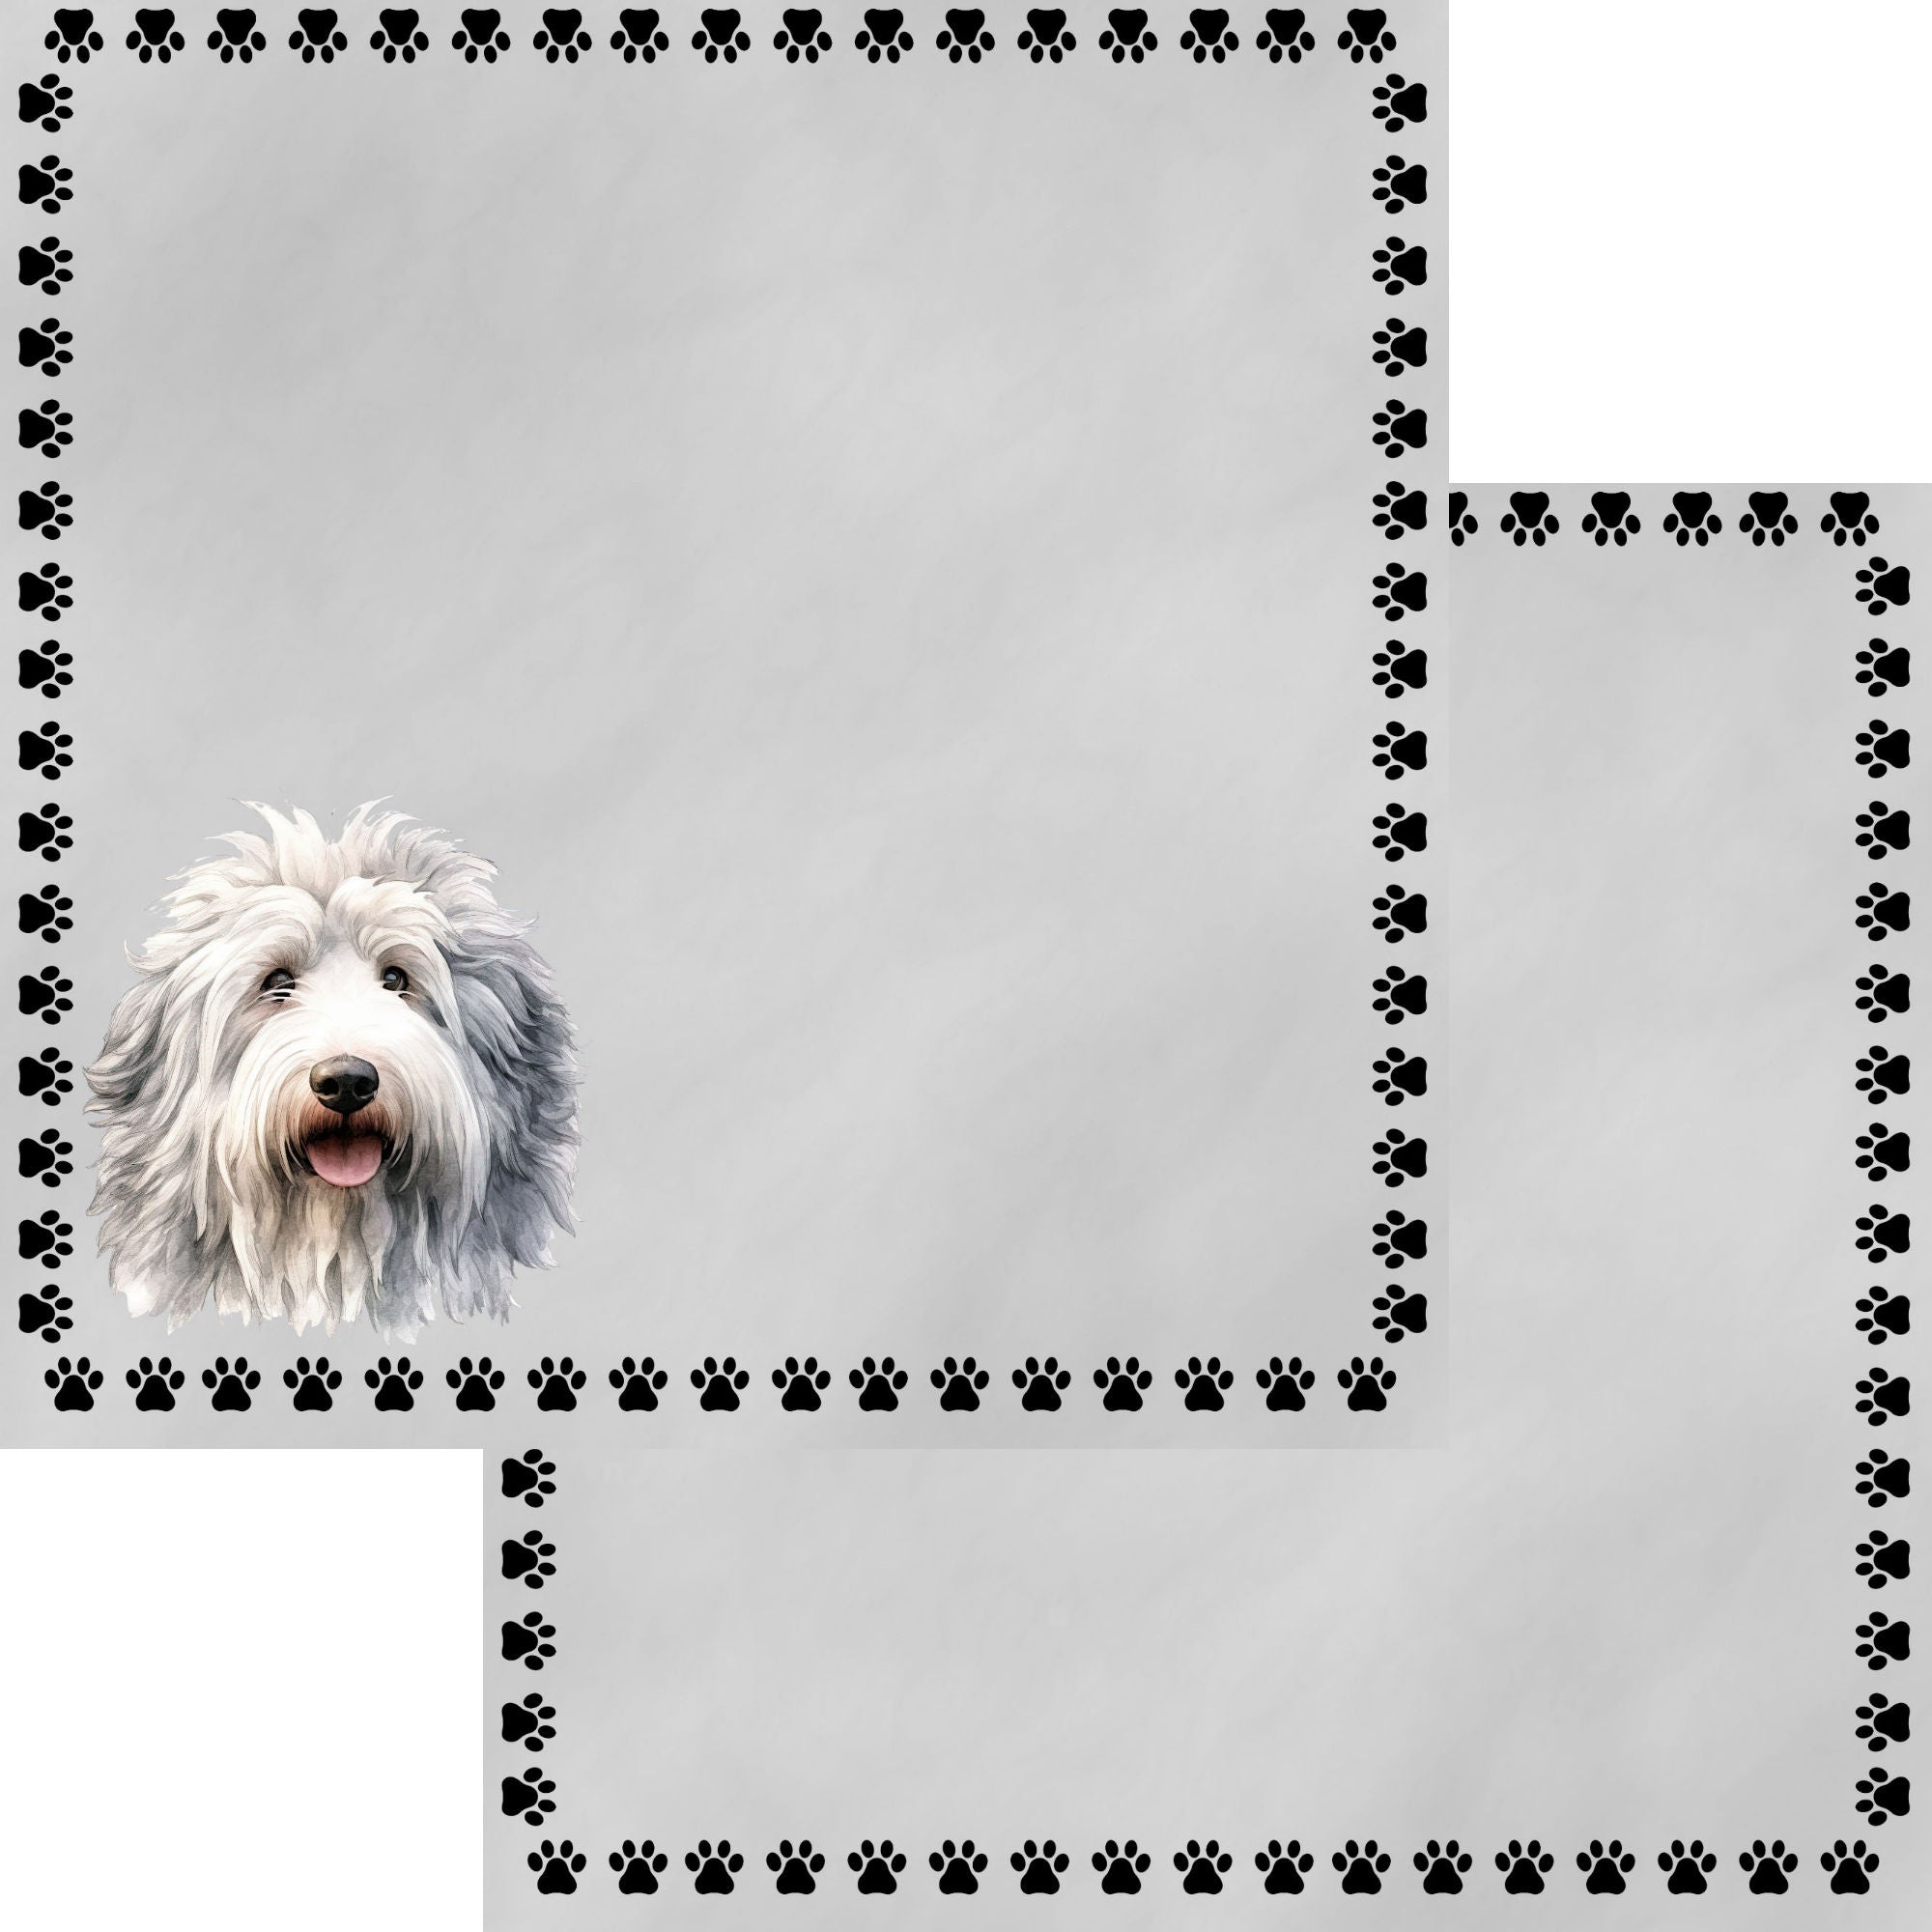 Dog Breeds Collection Old English Sheepdog 12 x 12 Double-Sided Scrapbook Paper by SSC Designs